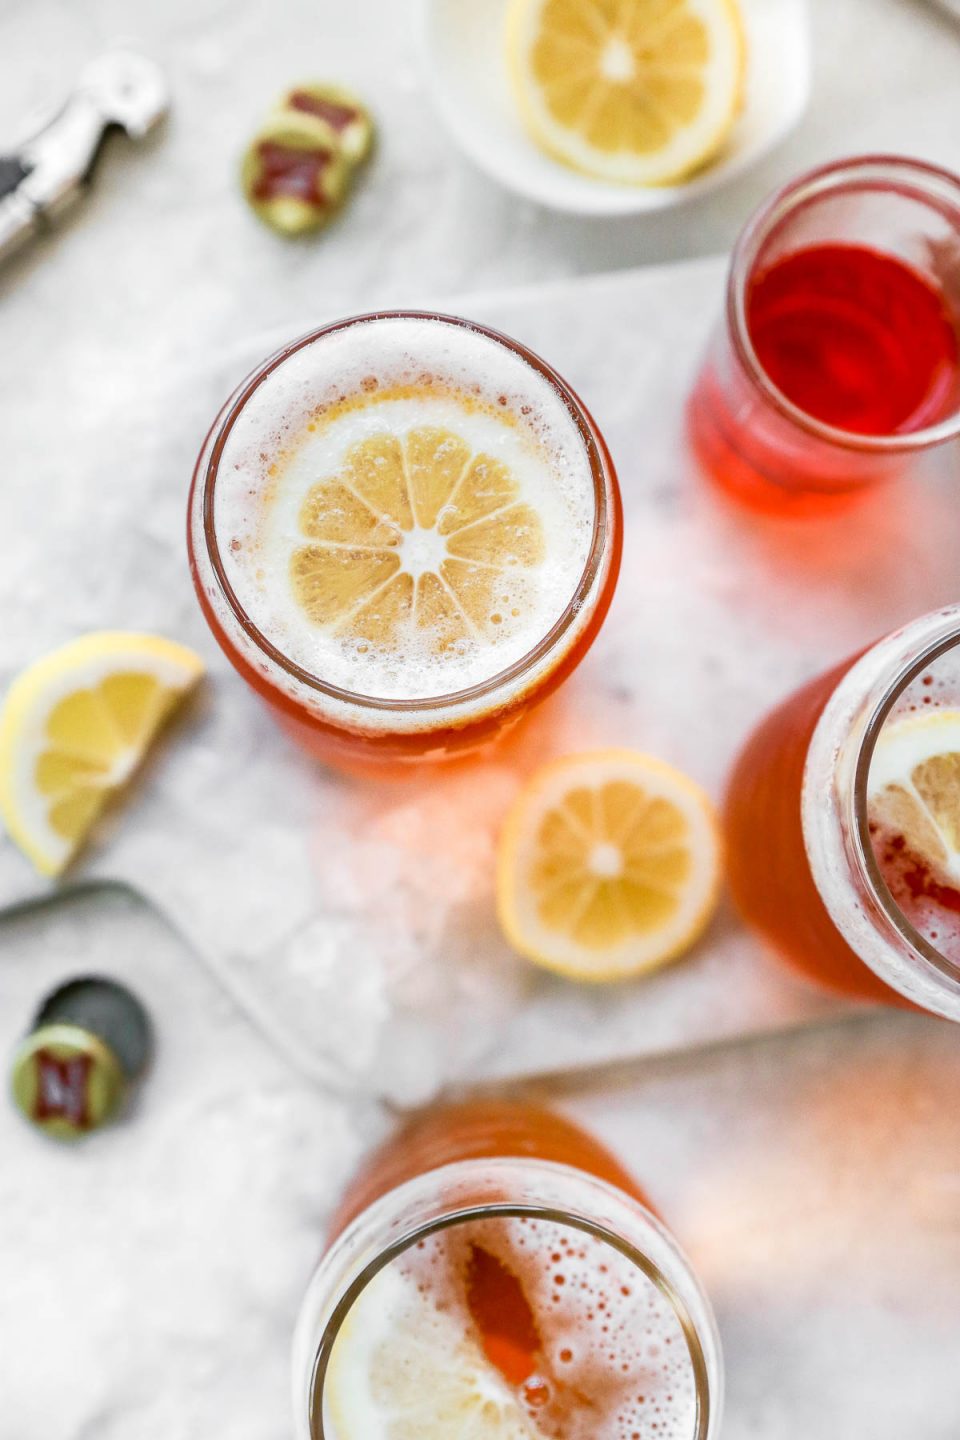 Overhead view of 3 spaghett cocktails. The cocktails are in pint glasses, garnished with sliced lemon. Surrounding the glasses are more sliced lemon, Miller High Life bottle caps, a bottle opener, & a small glass jar of bright orange Aperol liqueur.